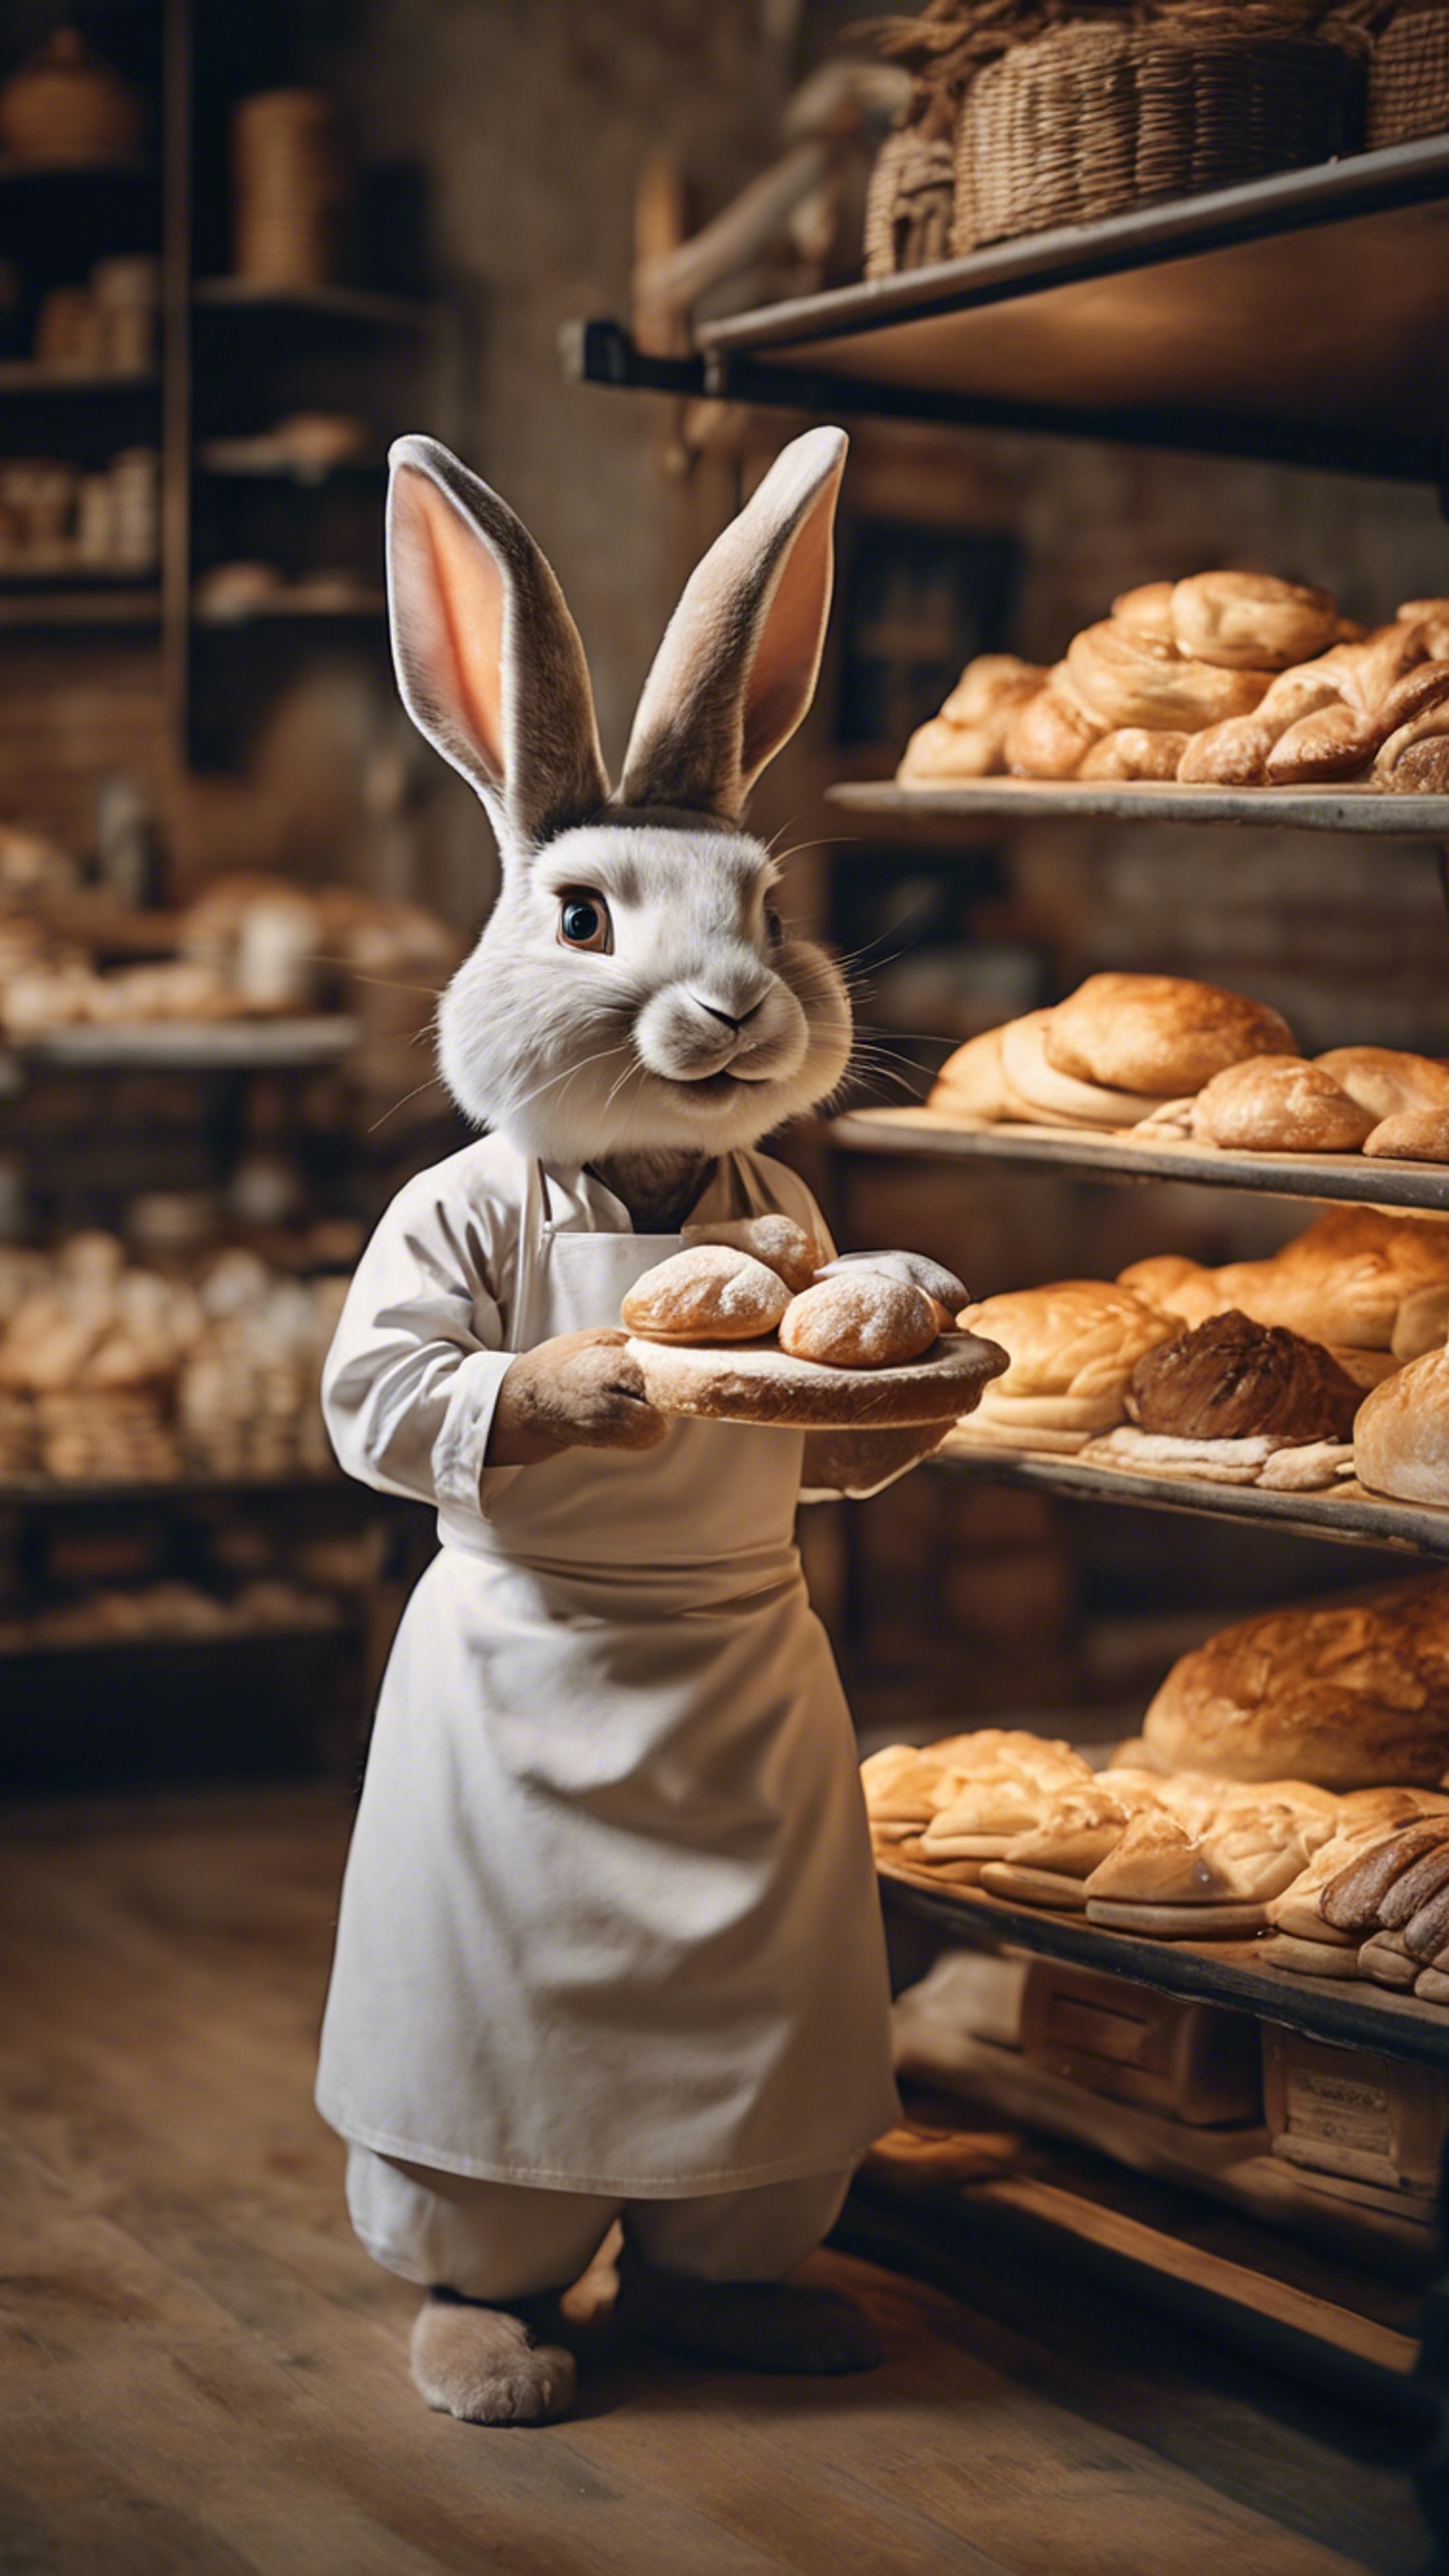 A rabbit baker displaying freshly-baked goods in a charming bakery.壁紙[908b61b6762c4c248f7e]